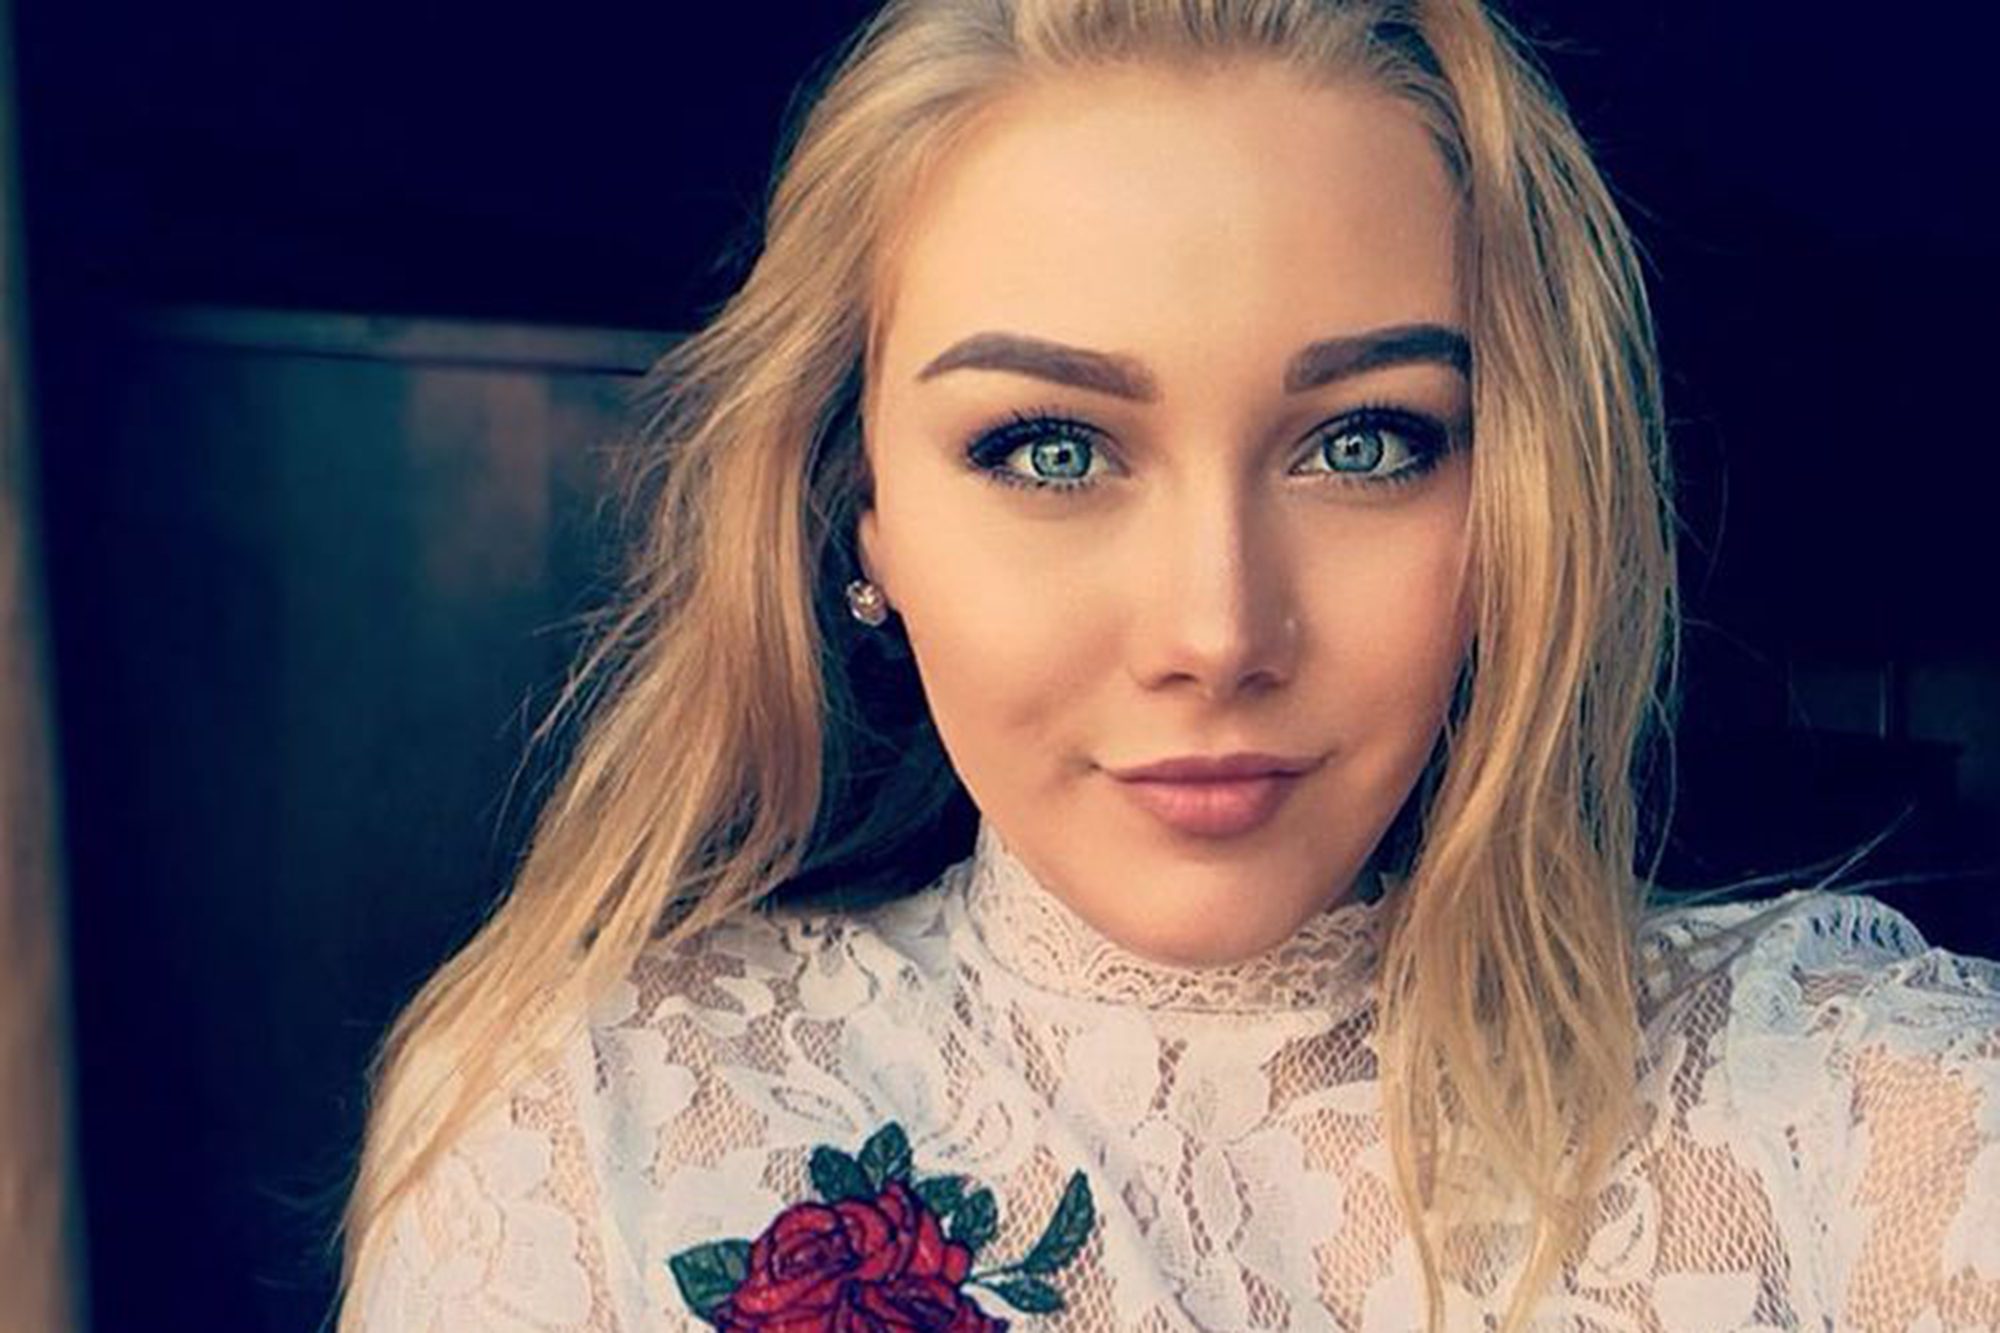 Corinna Slusser was 18 when she disappeared and allegedly became involved with a pimp who may have used online advertisements.